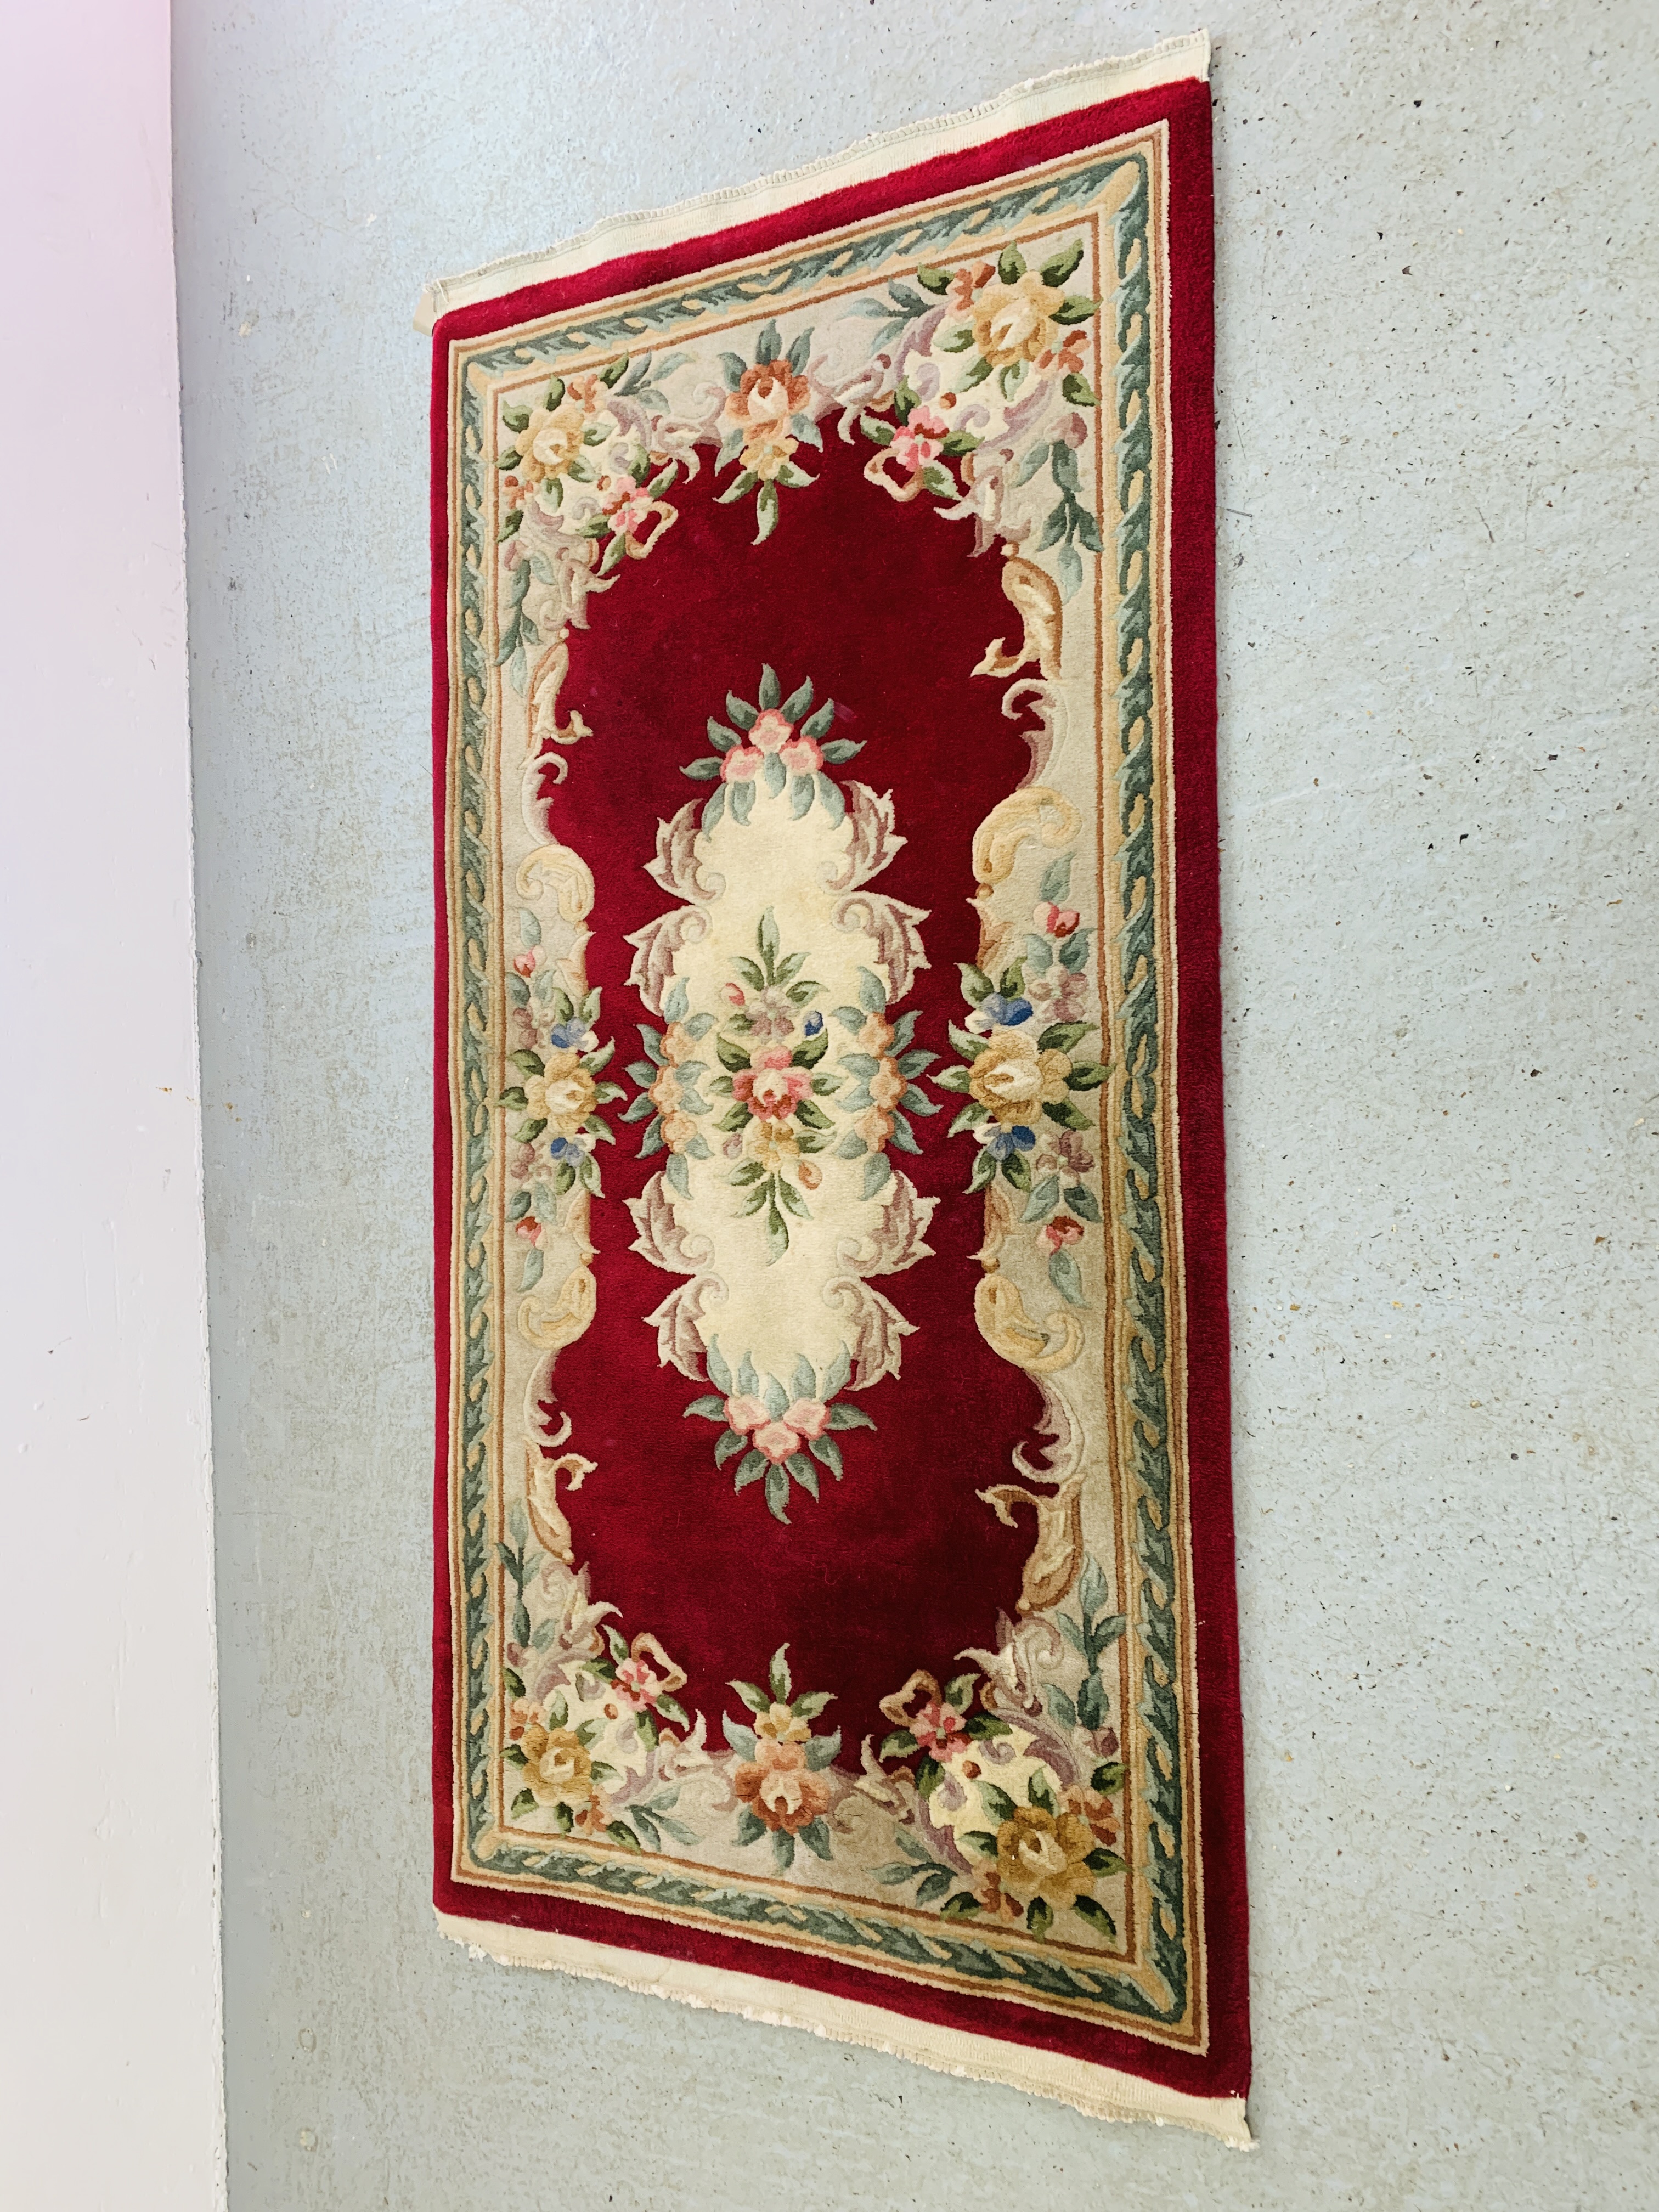 AN ORIENTAL DECORATED RUG 184CM X 92CM AND MODERN MACHINE MADE KEESHAN RED PATTERNED RUG 197 X - Image 9 of 11